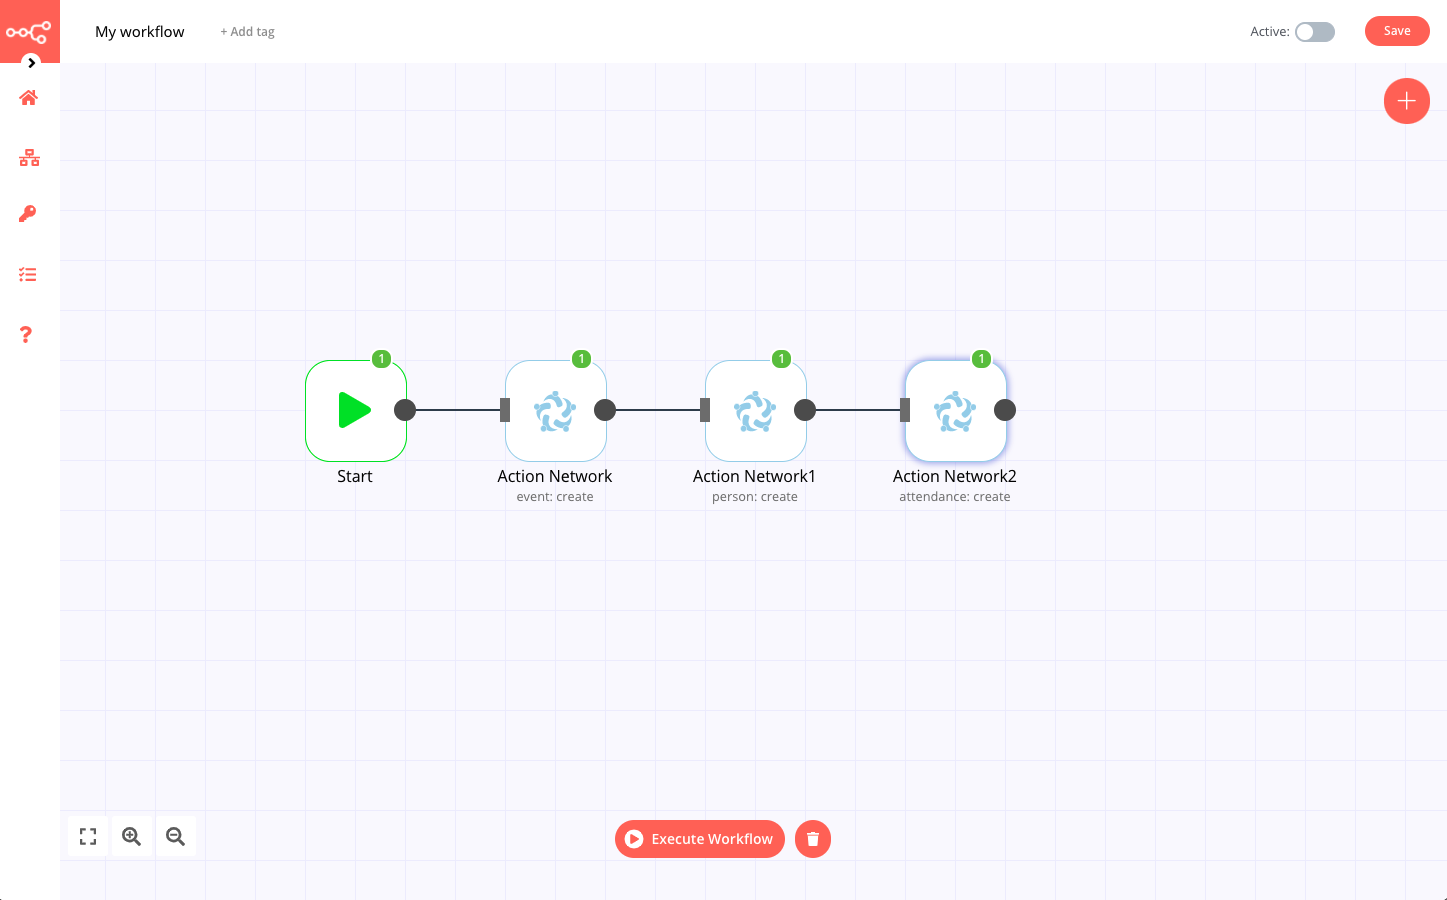 A workflow with the Action Network node